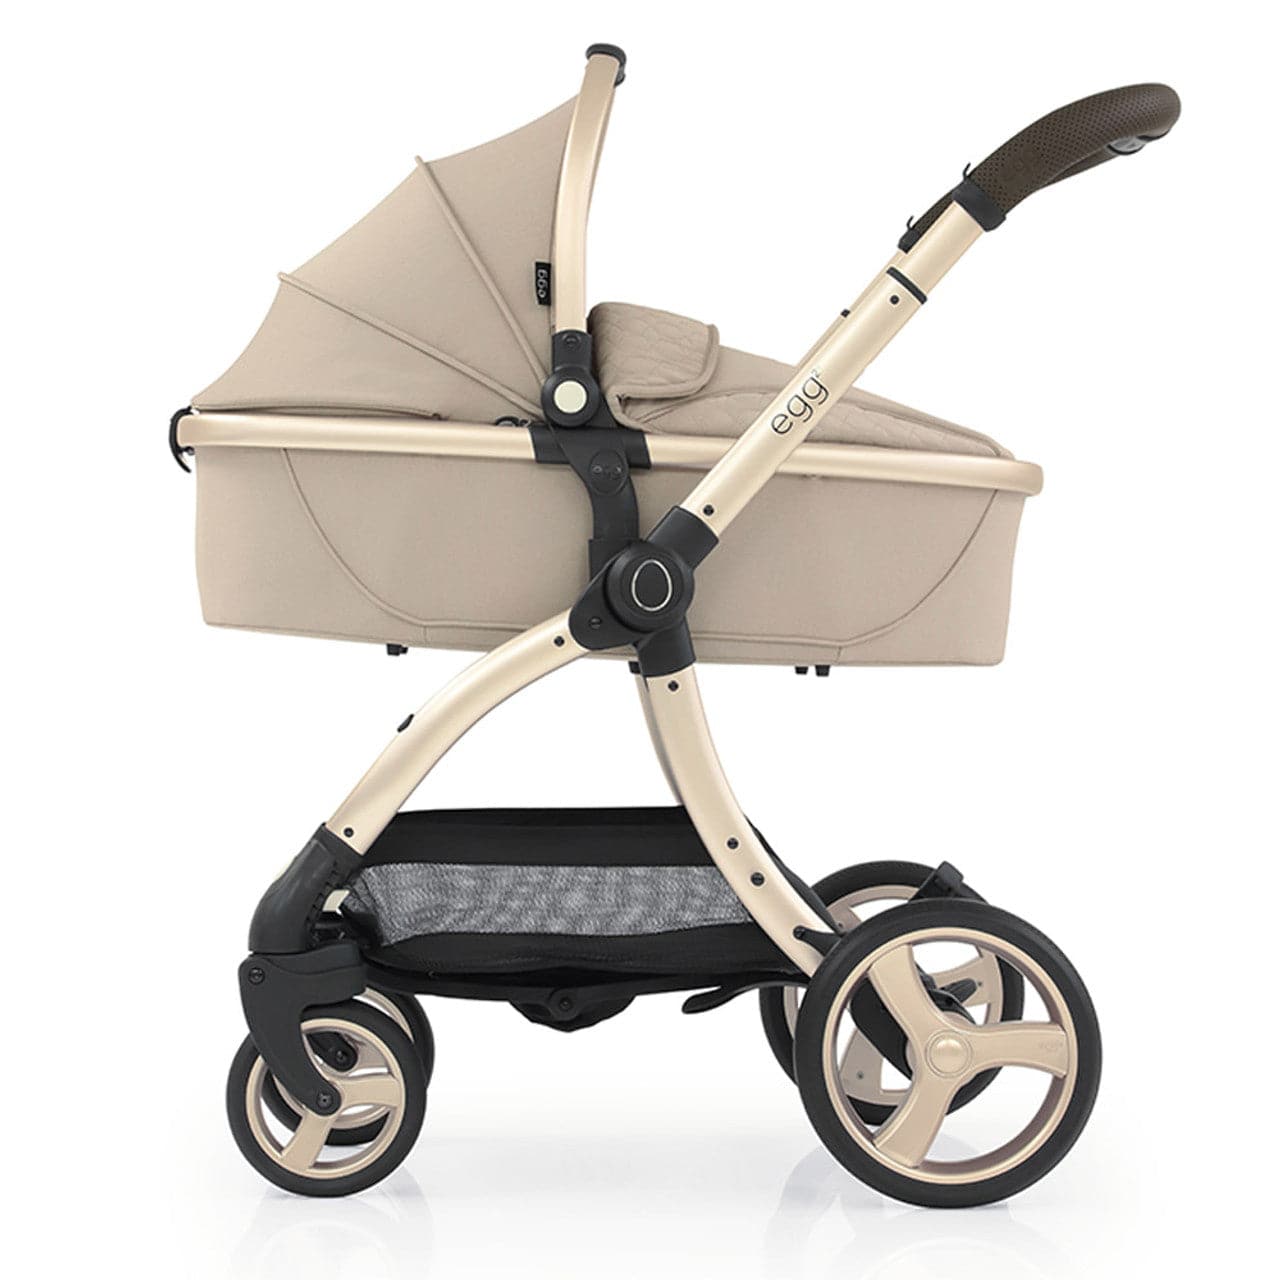 Egg® 2 Pushchair + Carrycot - Feather - For Your Little One